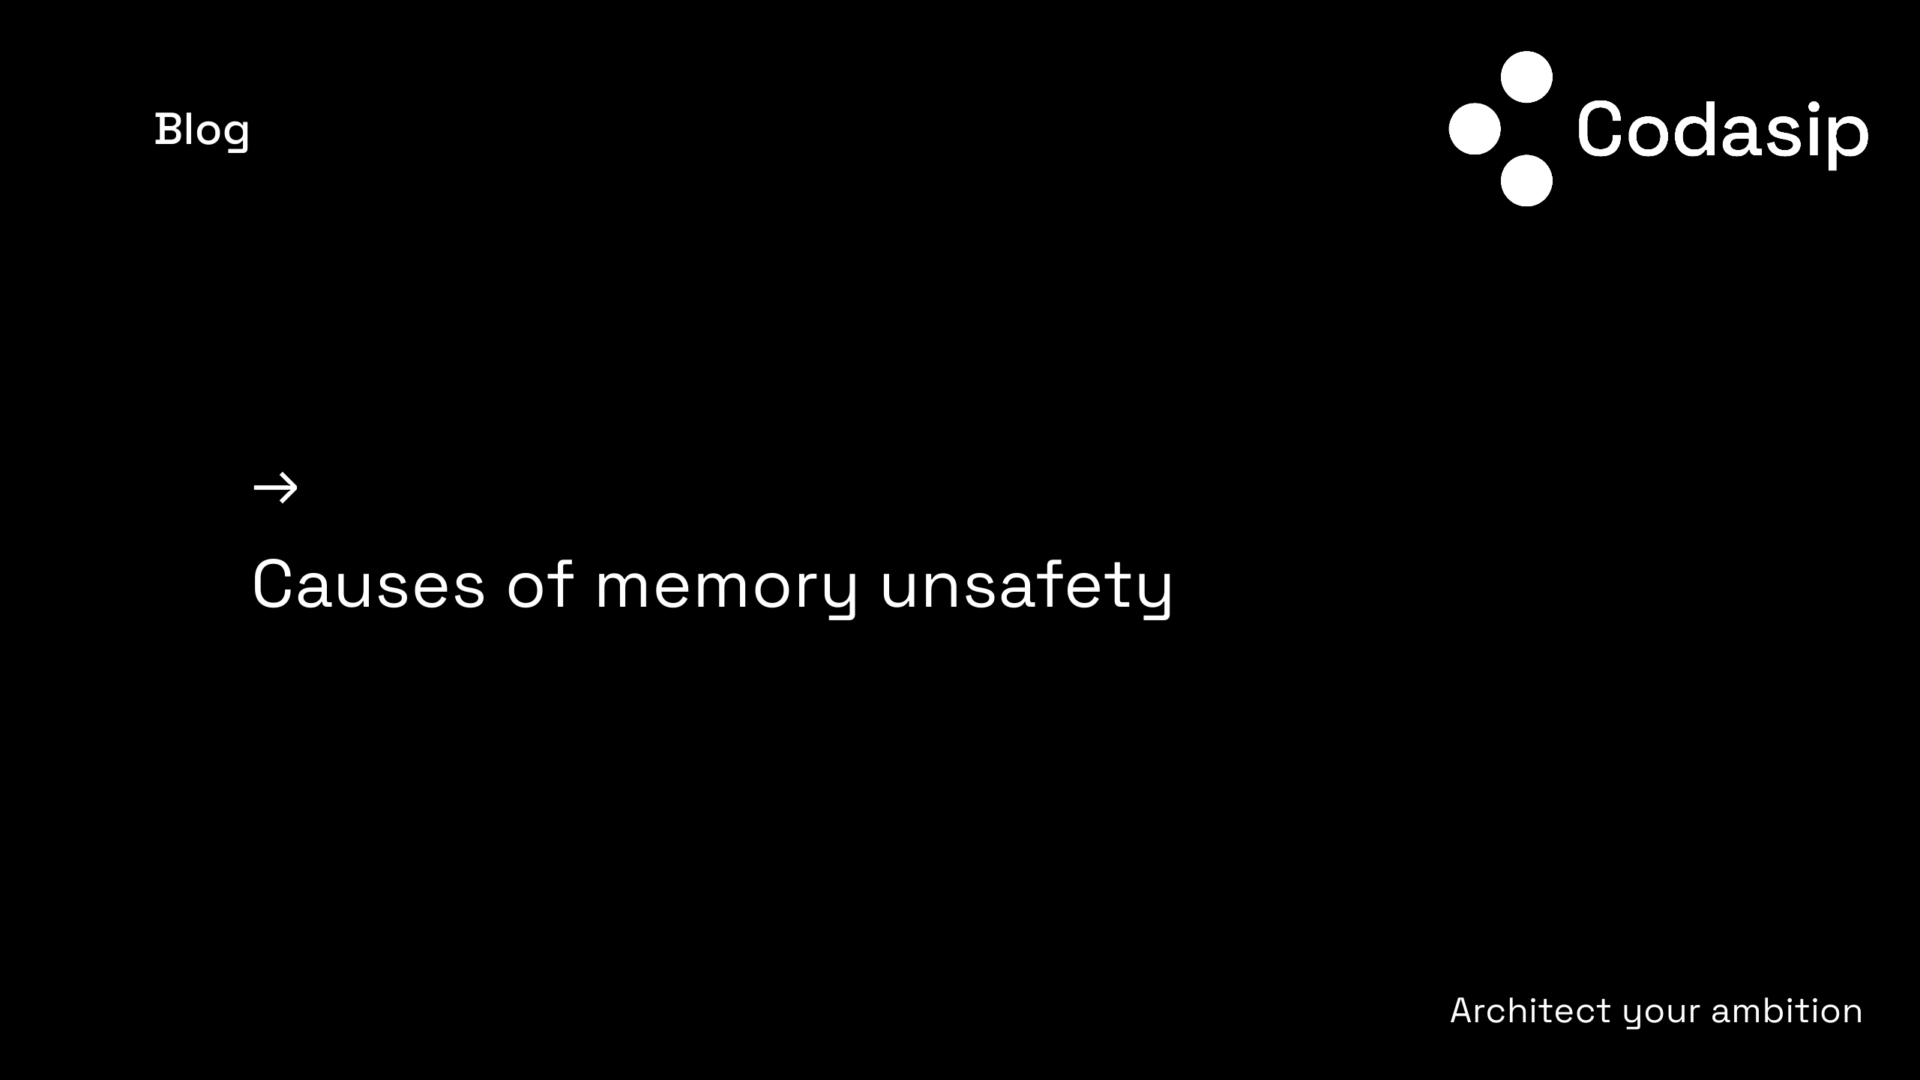 Blog featured image - Causes of memory unsafety